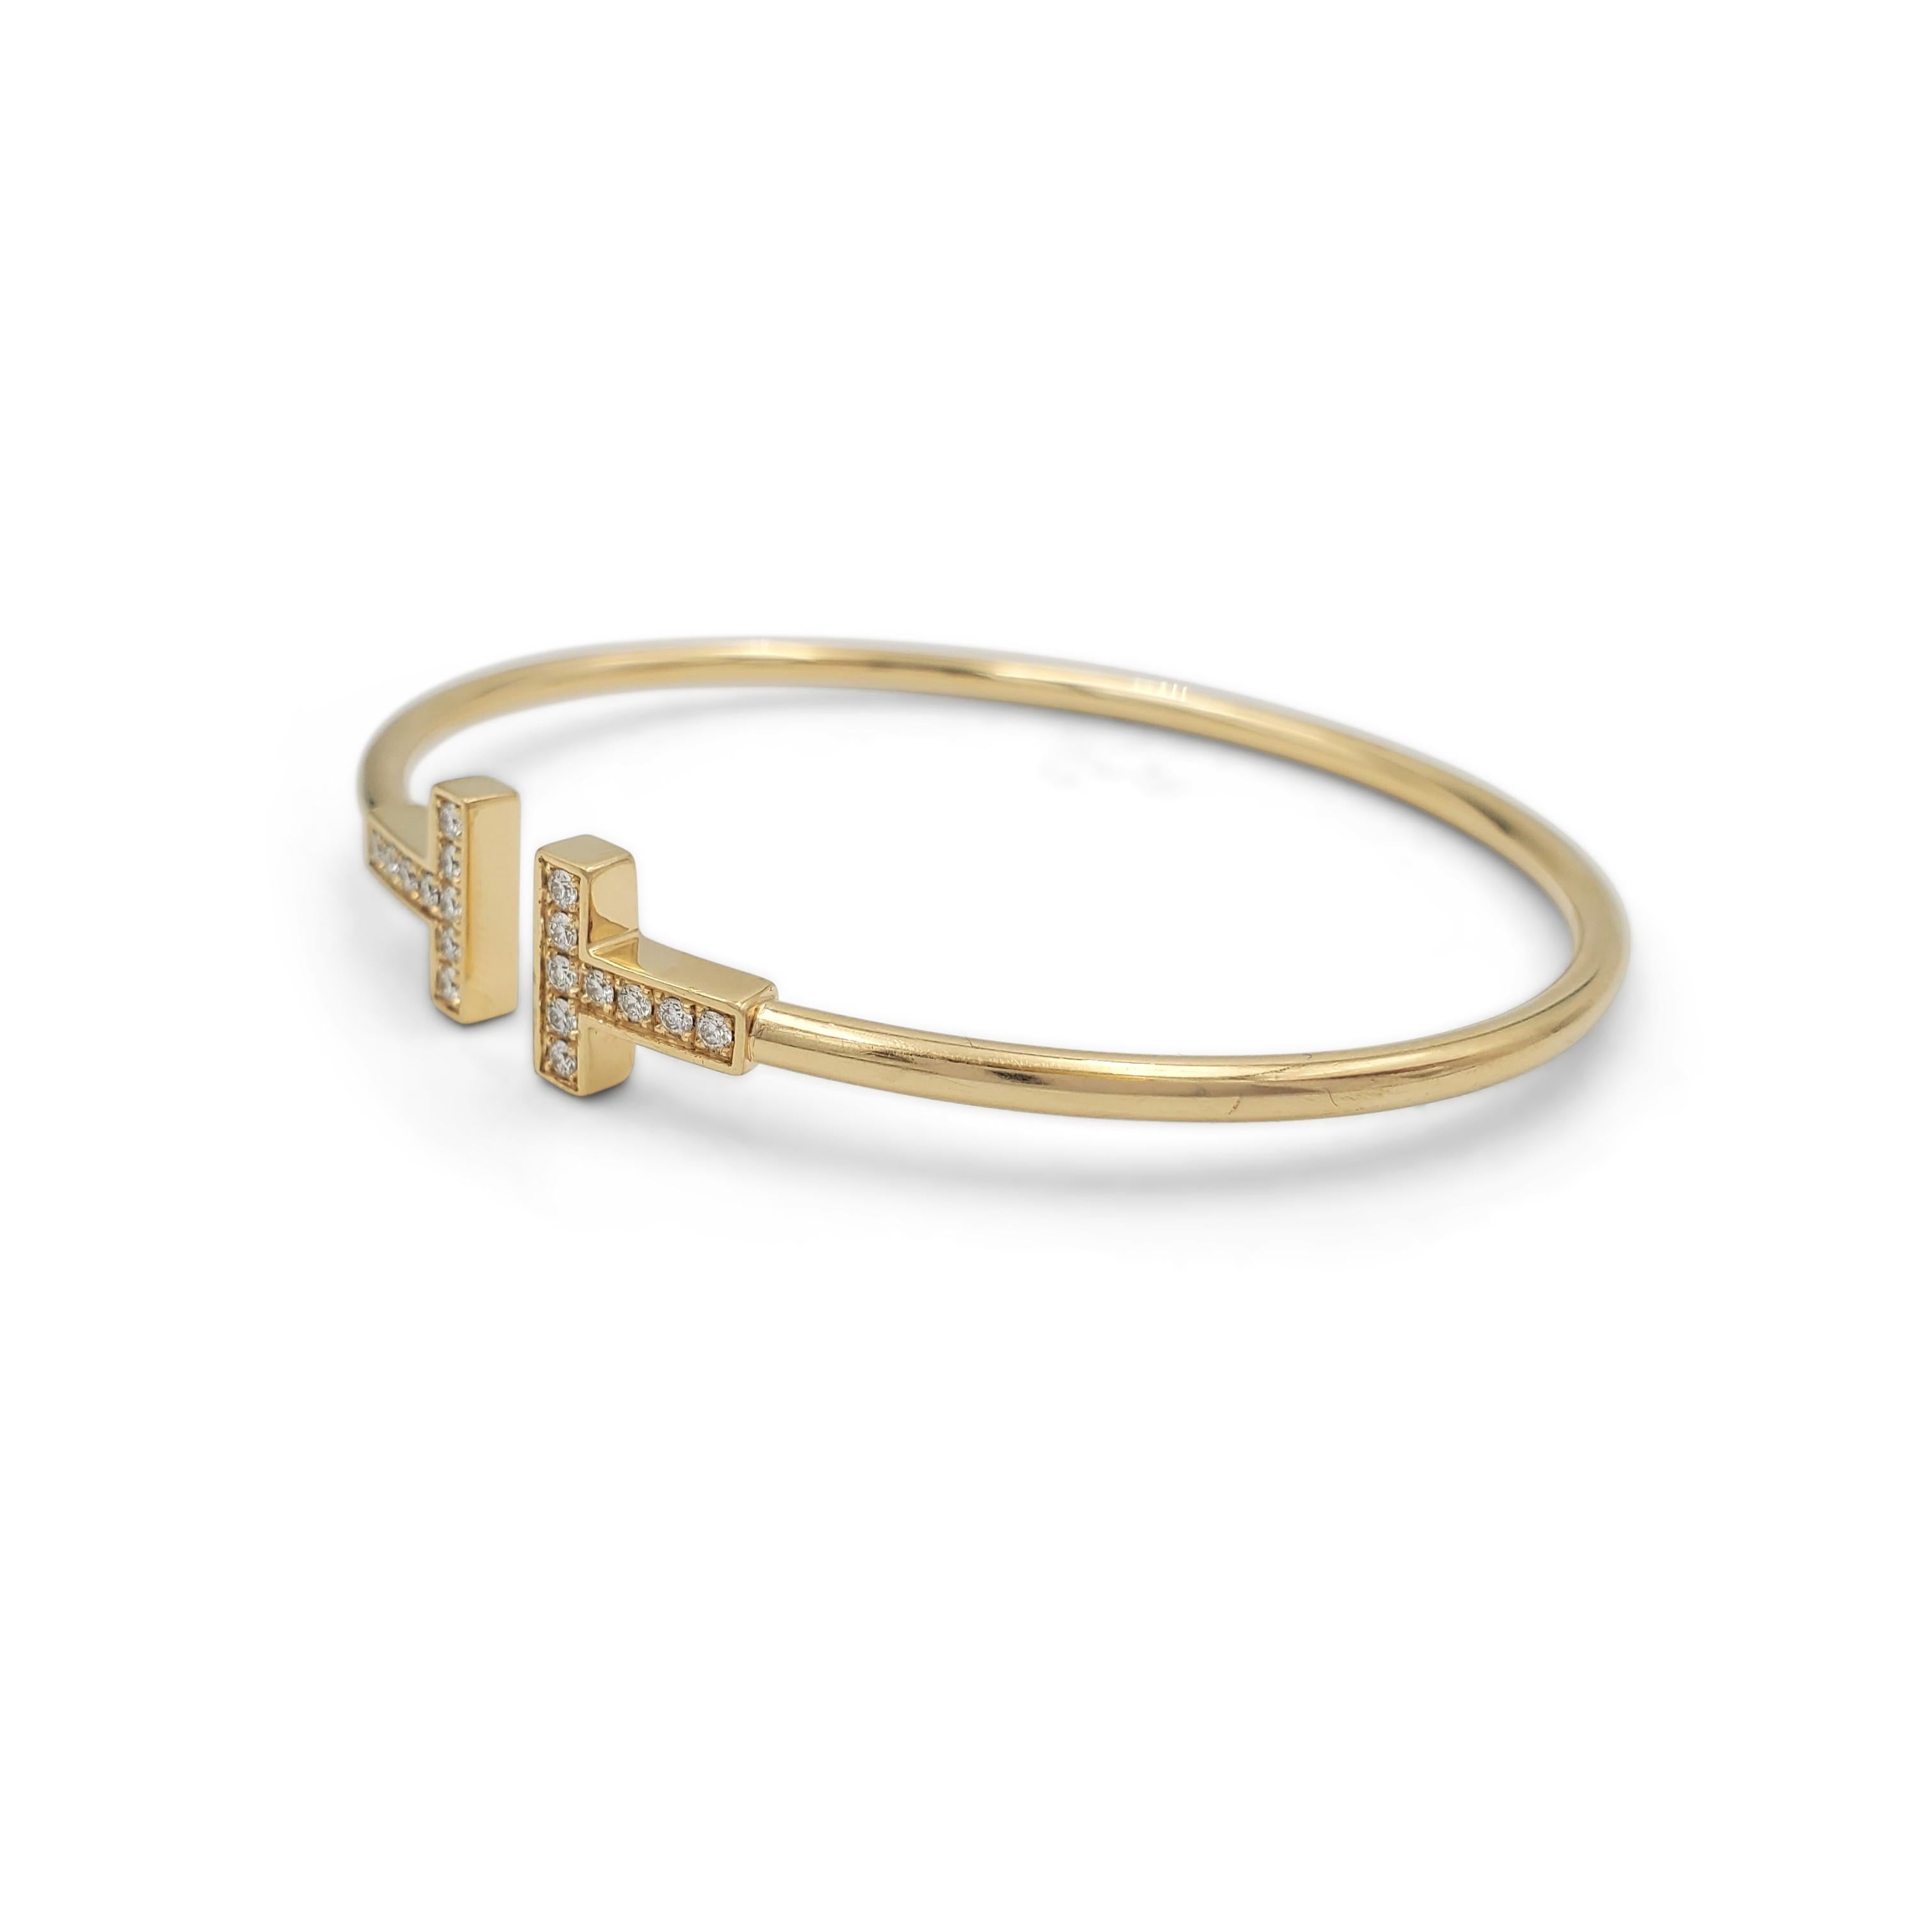 Authentic Tiffany & Co. T Square Wire bracelet made in 18 karat yellow gold with approximately 18 diamonds weighing an estimated .18 carats. Can fit up to a size 6 1/4 wrist.  Inspired by the strong, clean lines of the letter T, this bracelet is